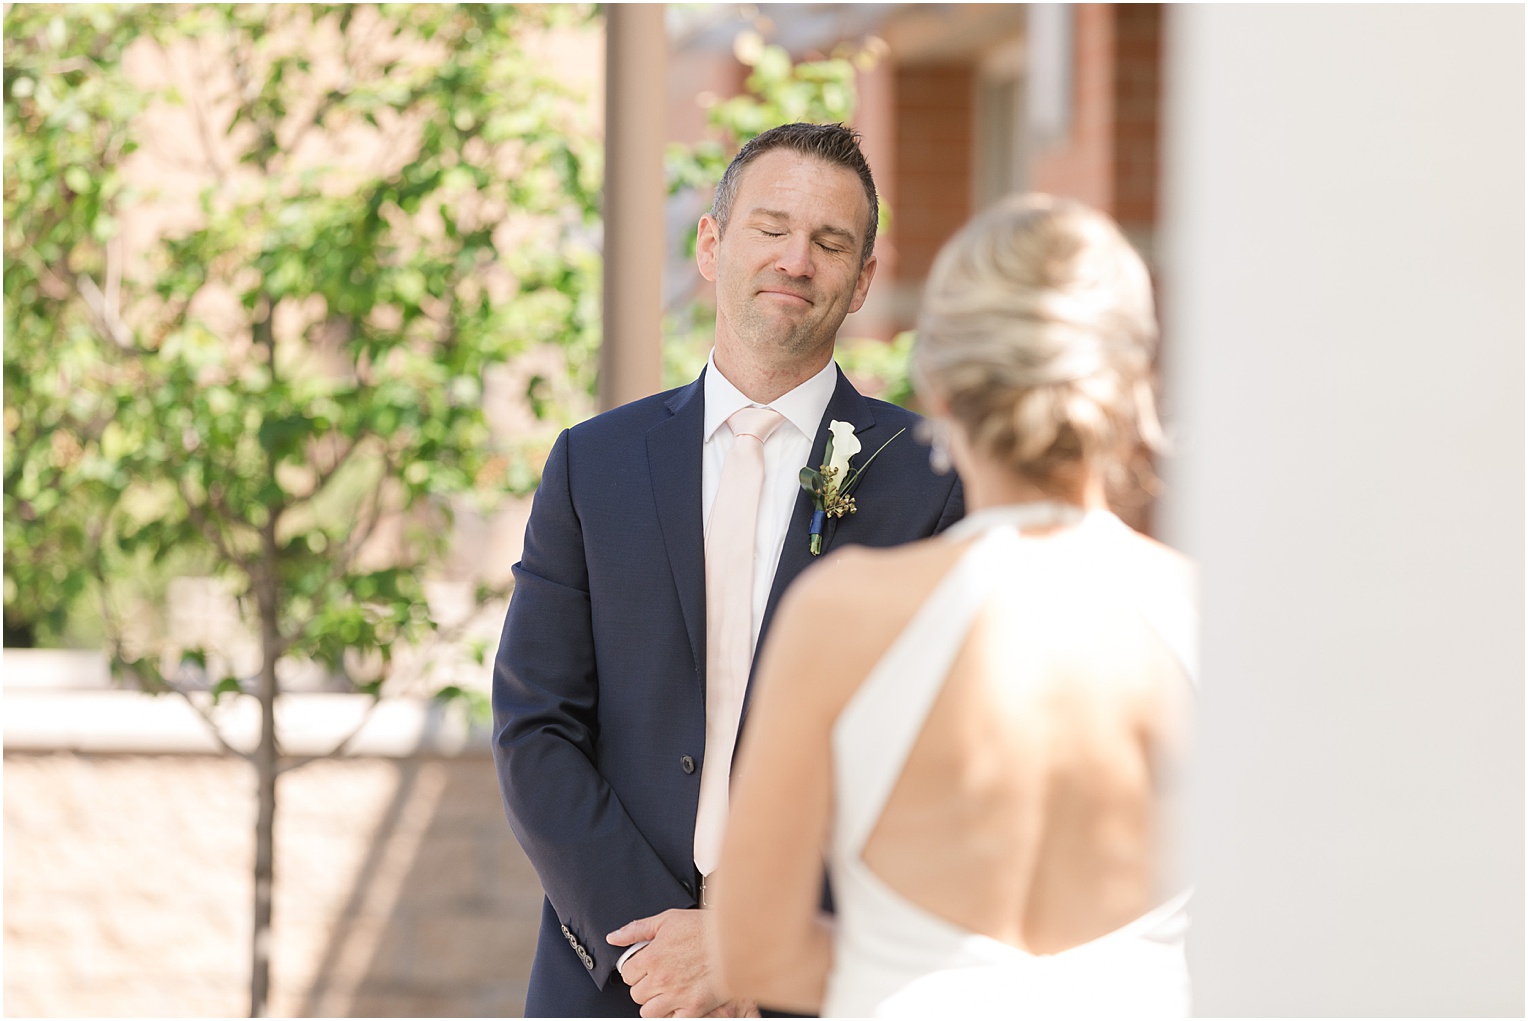 Kansas City Wedding at Union Horse Distilling Co. Danielle + Brandon Neutral White and Navy Spring wedding bride and groom first look